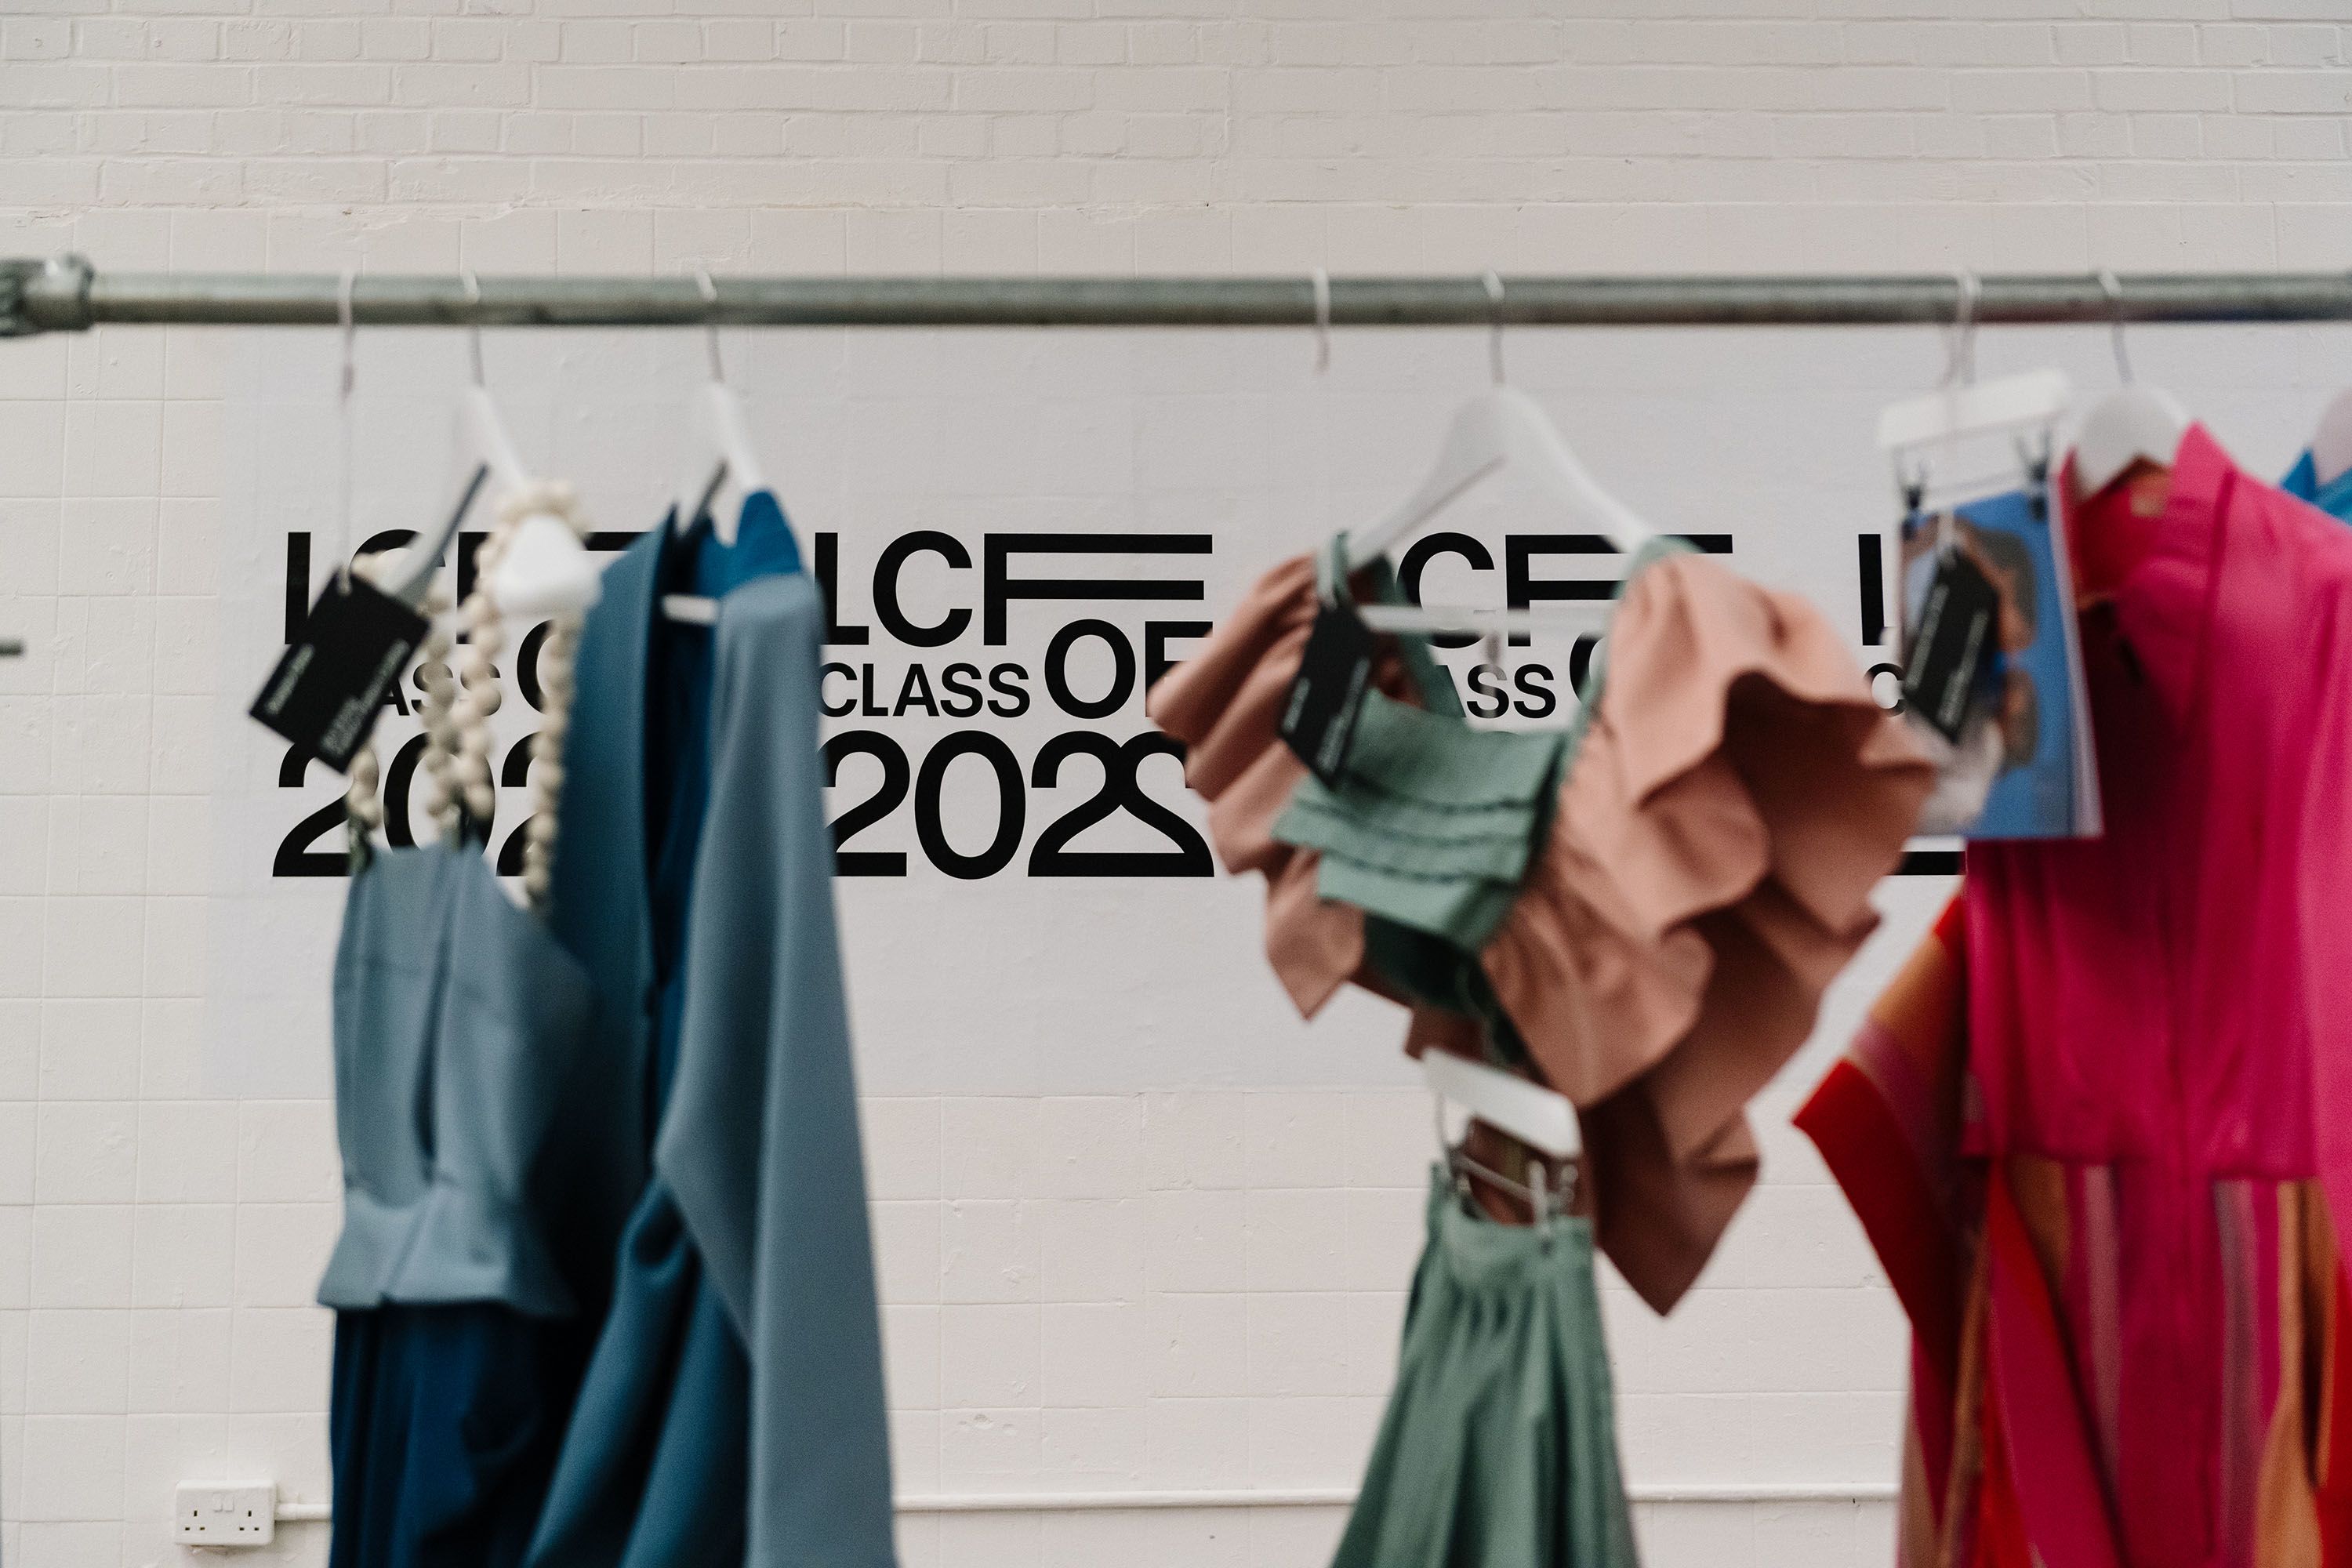 LCF Class of 2022 logo in background with defocused garments on rail